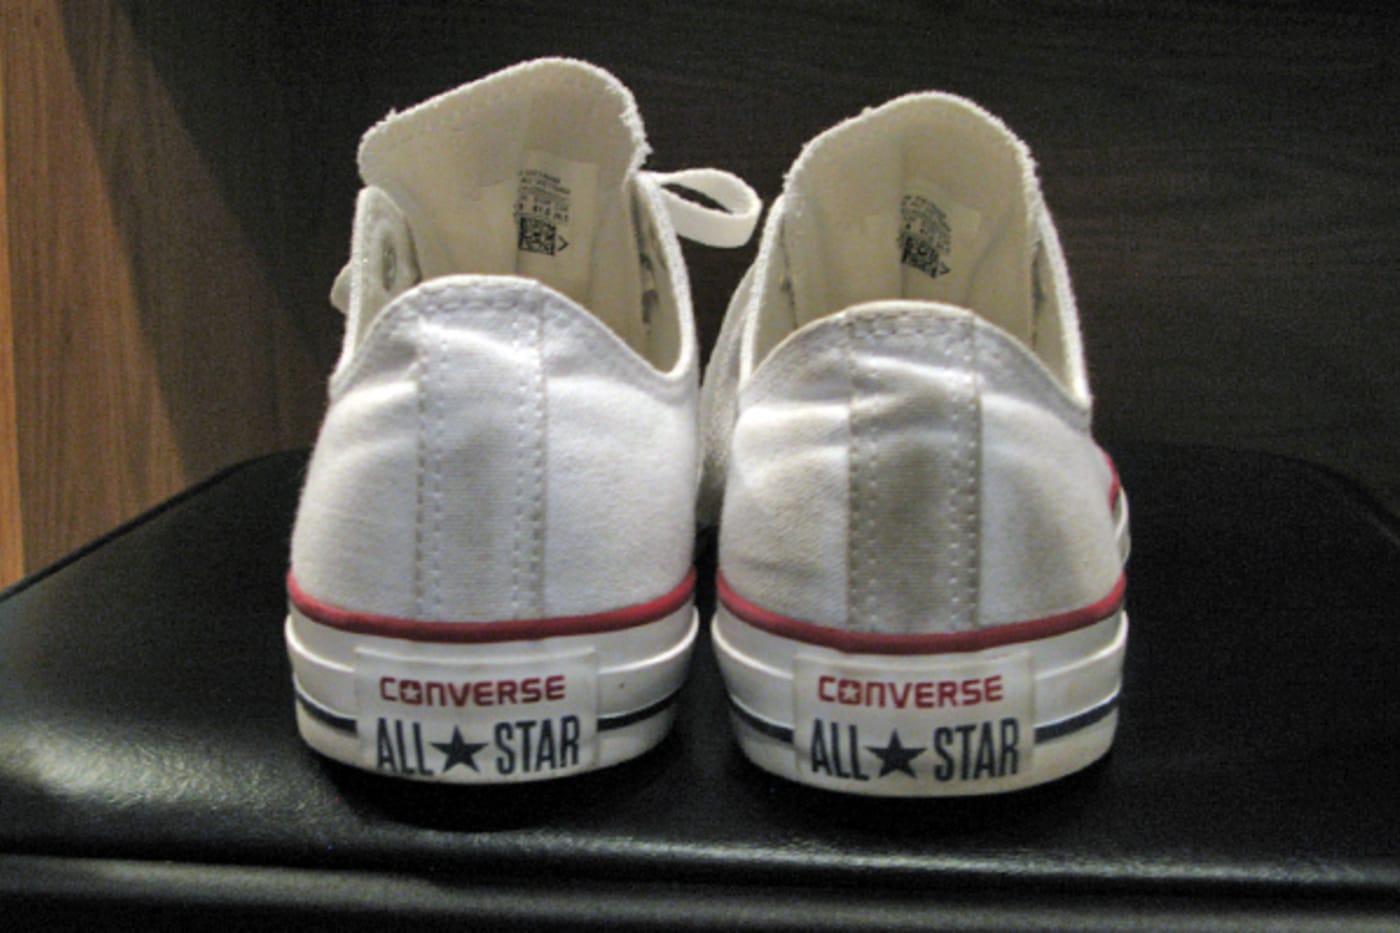 50 things converse all star 43 seconds